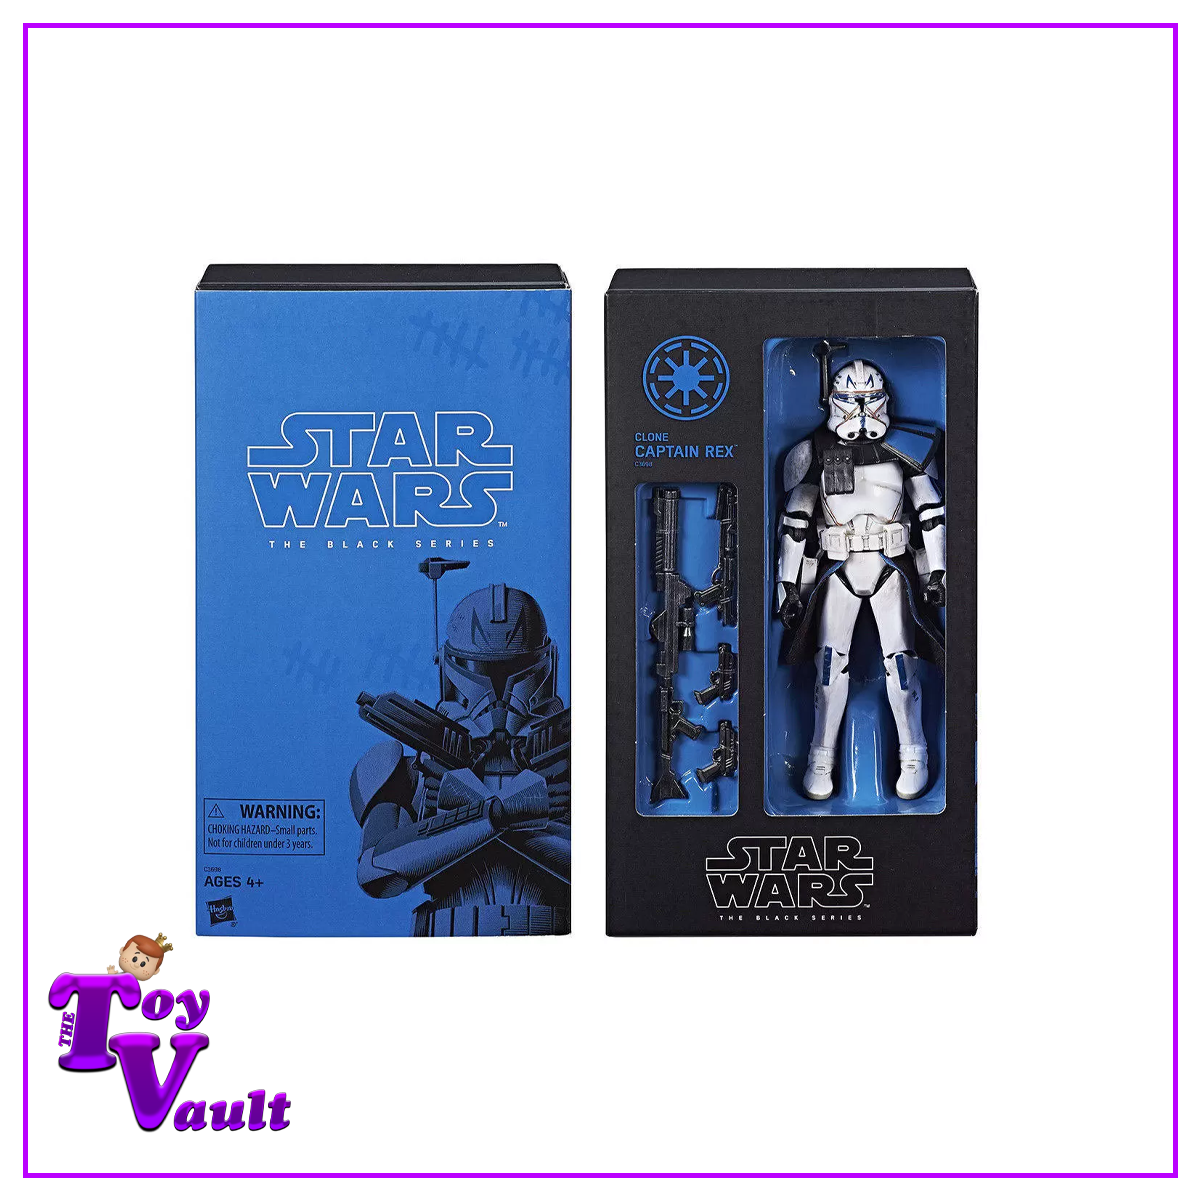 Hasbro Star Wars The Black Series The Clone Wars - Clone Captain Rex Action Figure with Special Collectors Box